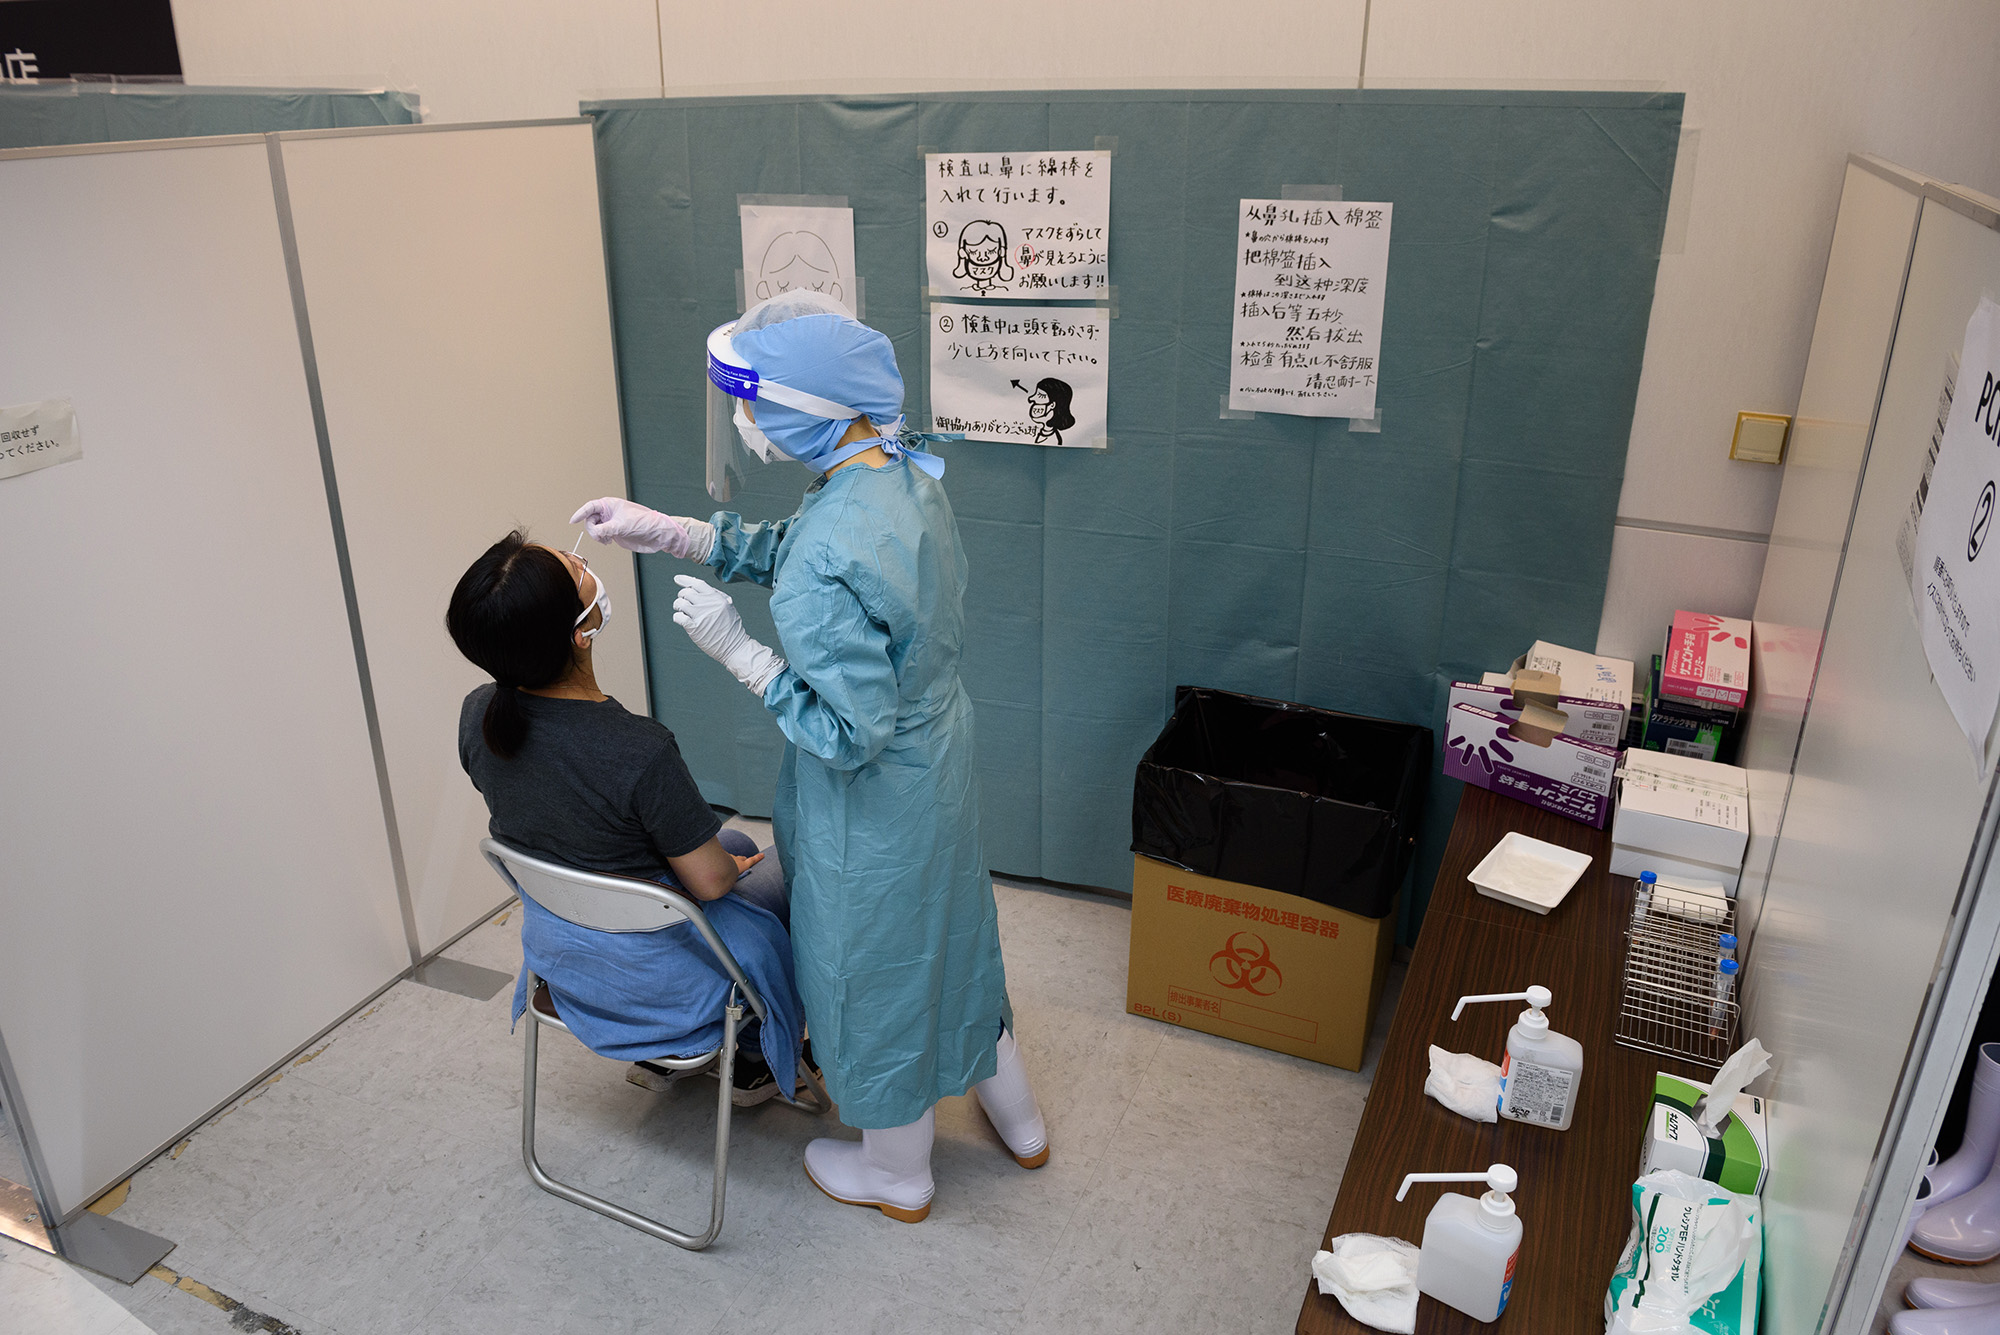 A medical worker in protective gear collects a nasal swab from an arrival passenger to test for Covid-19 at a polymerase chain reaction (PCR) testing site inside Narita Airport in Narita, Japan, on Sunday, July 19. 